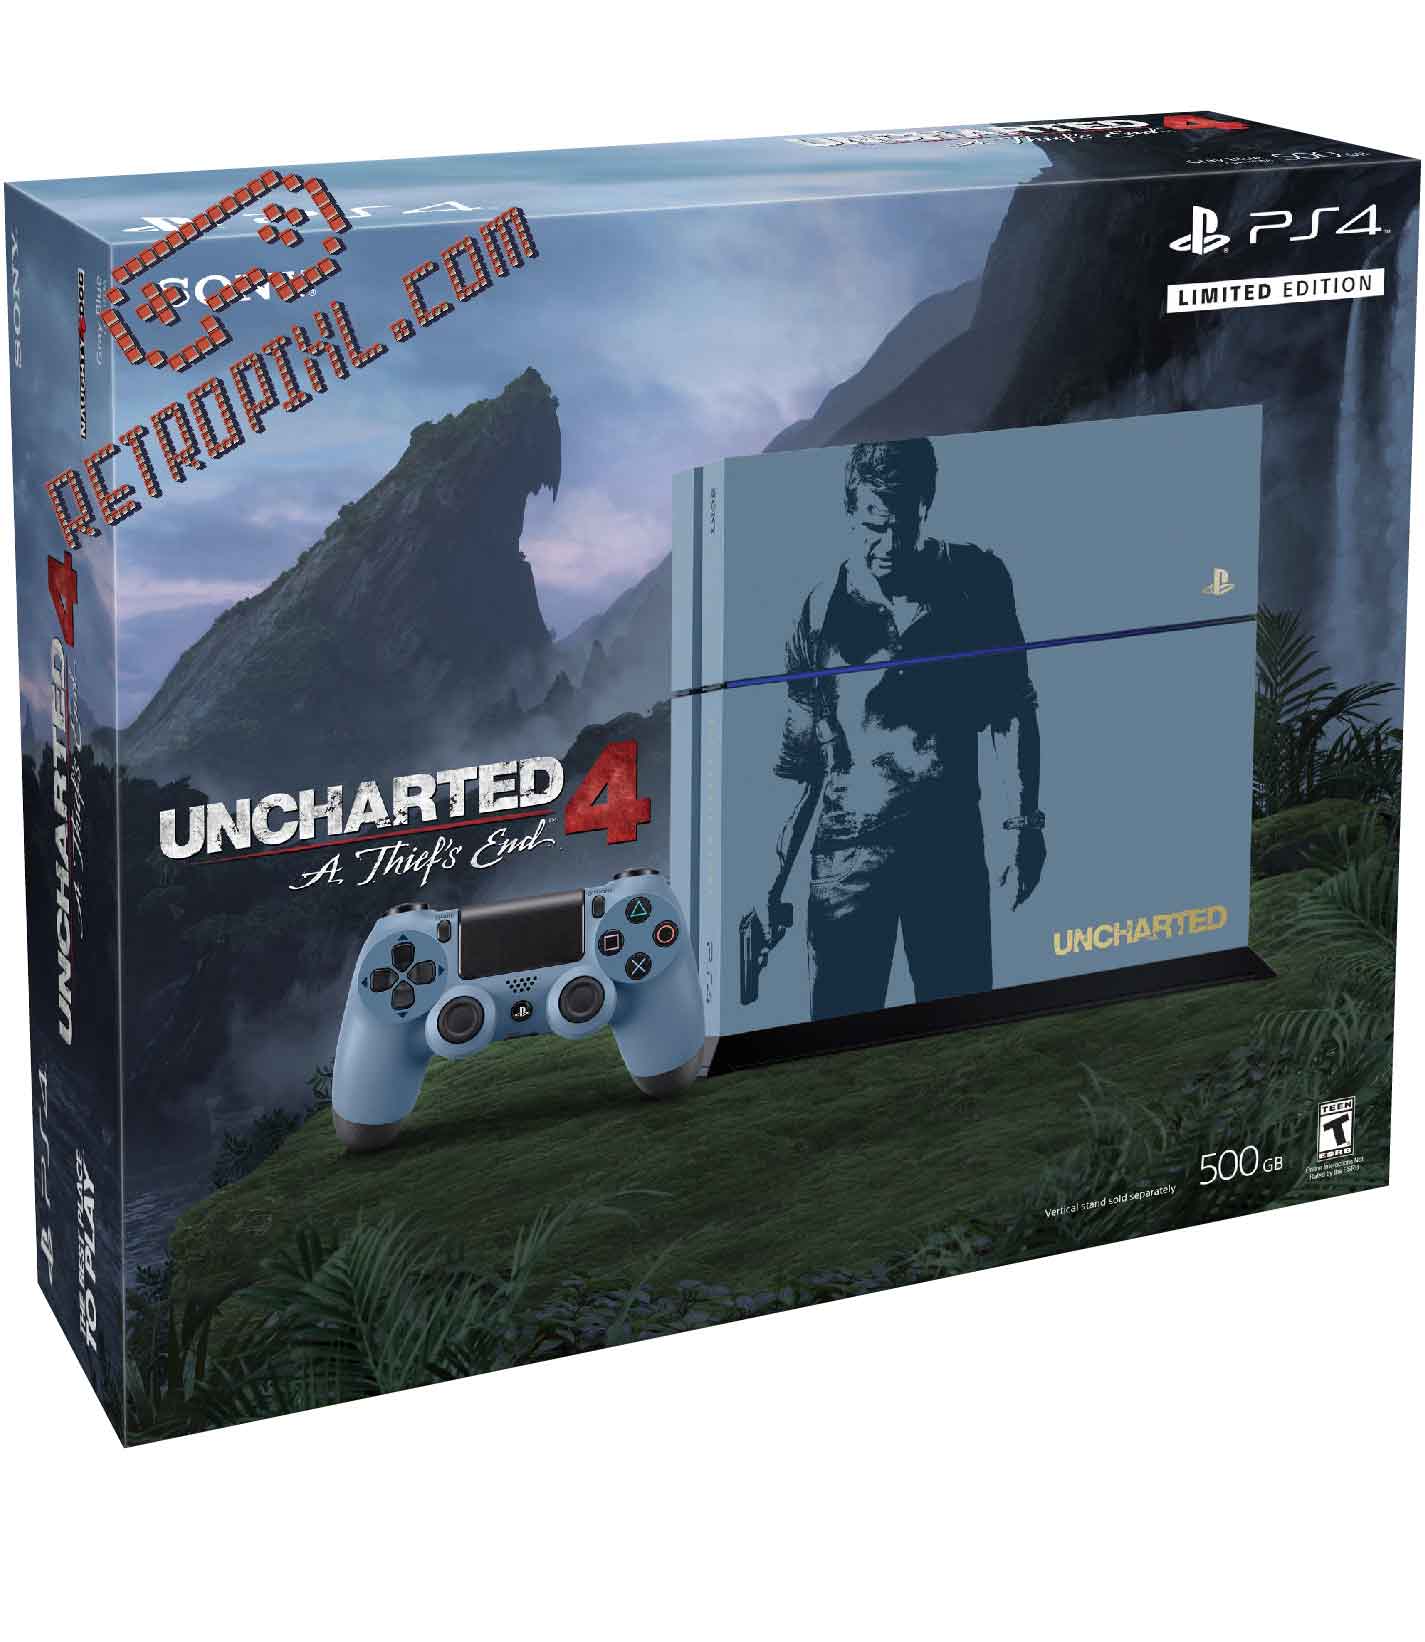 Uncharted 4 A Thief's End PS4 + DualShock 4 PS4